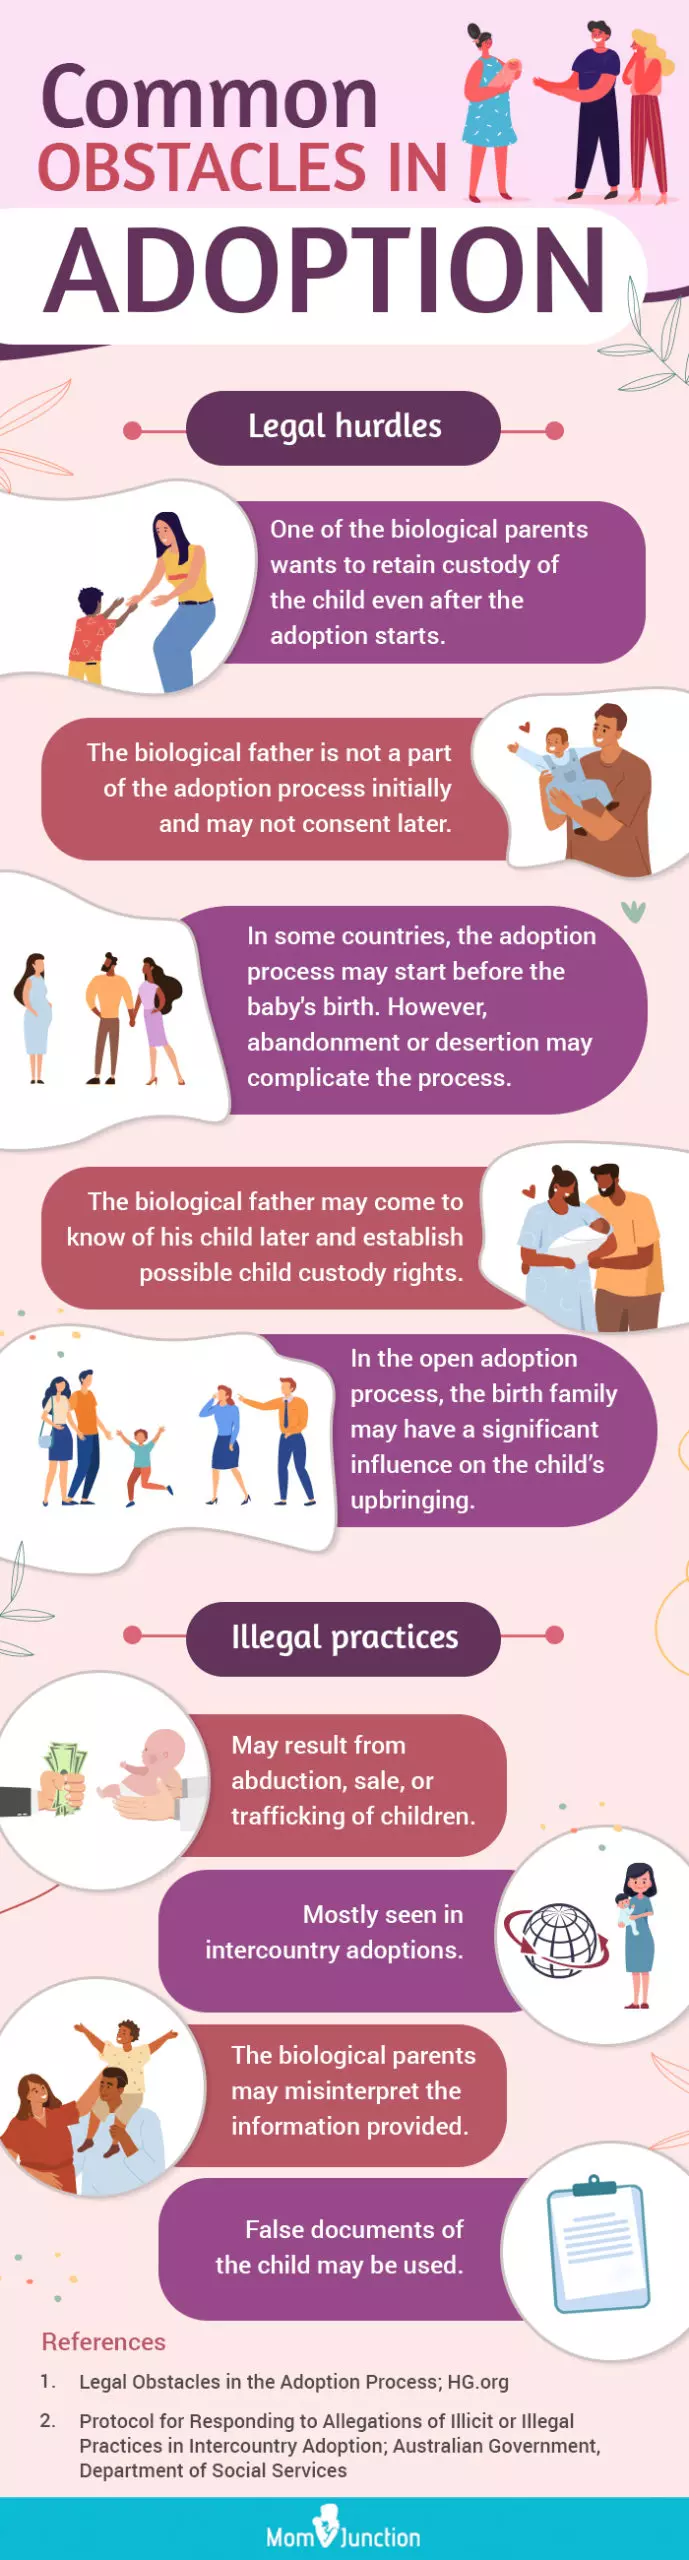 common obstacles in adoption (infographic)